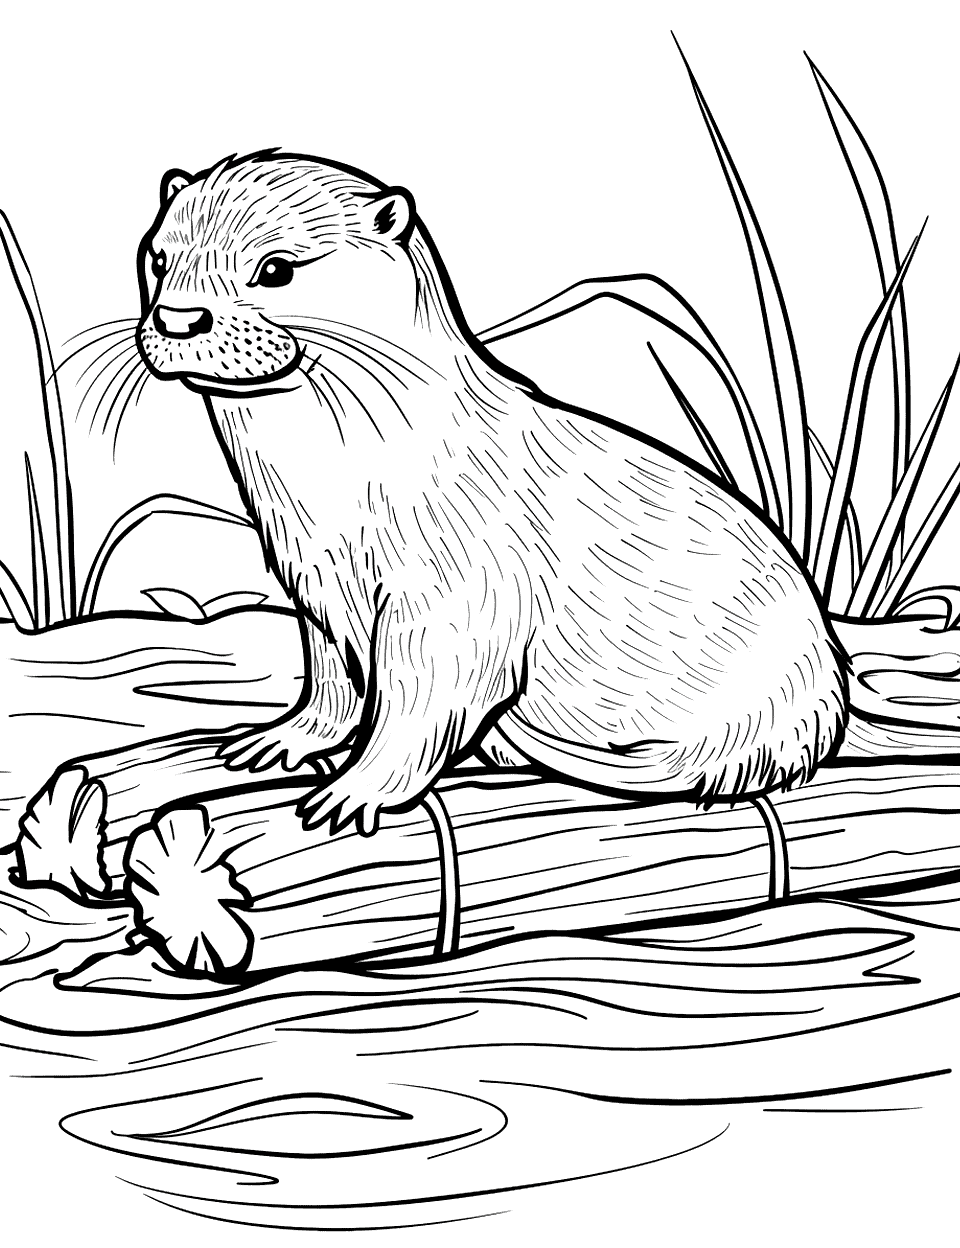 Otter on a Raft Coloring Page - An otter floating down a river on a makeshift raft made of twigs.